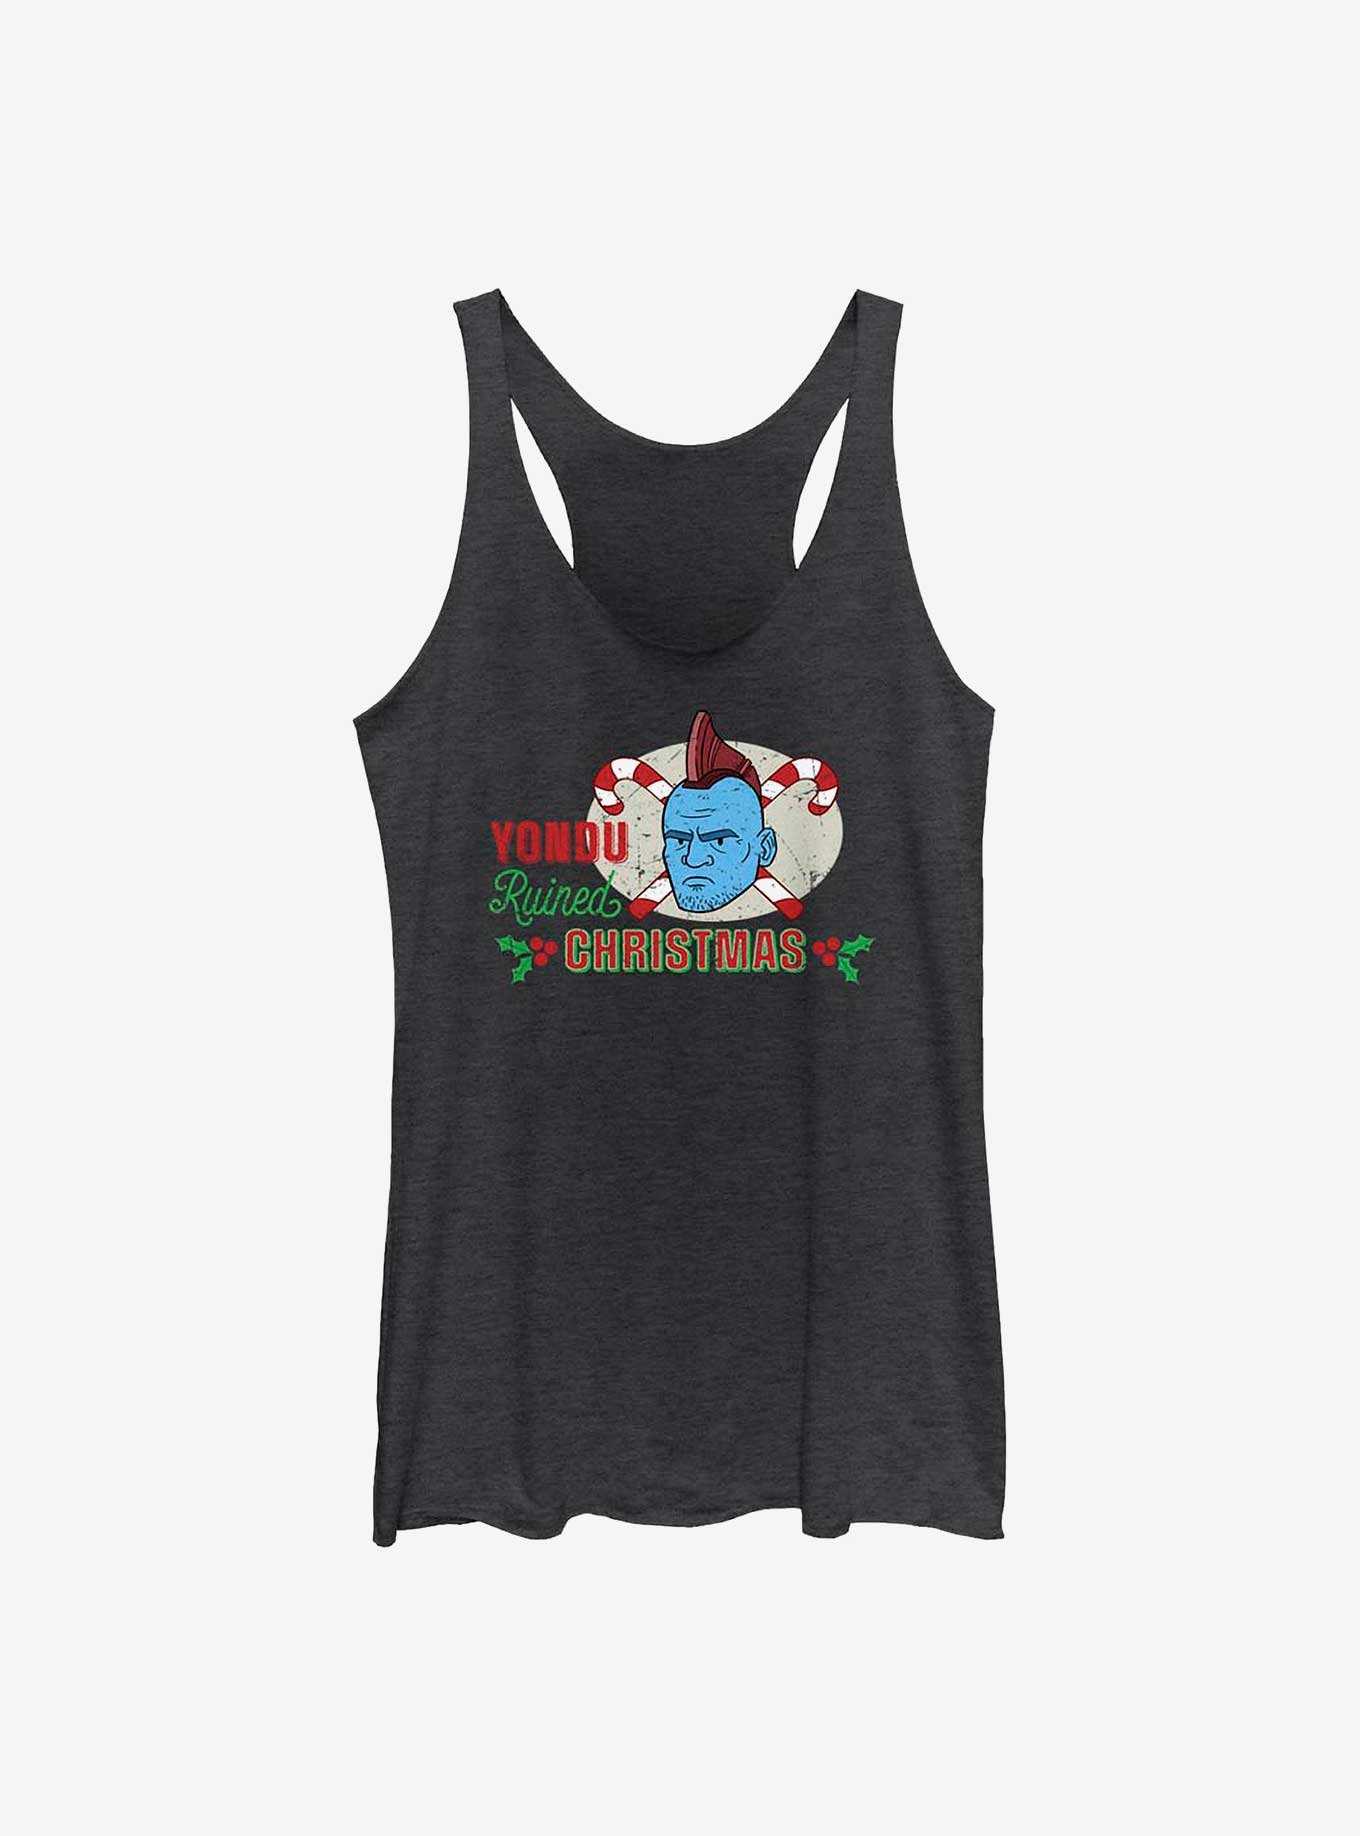 Marvel Guardians of the Galaxy Holiday Special Yondu Ruined Christmas Girls Tank, , hi-res